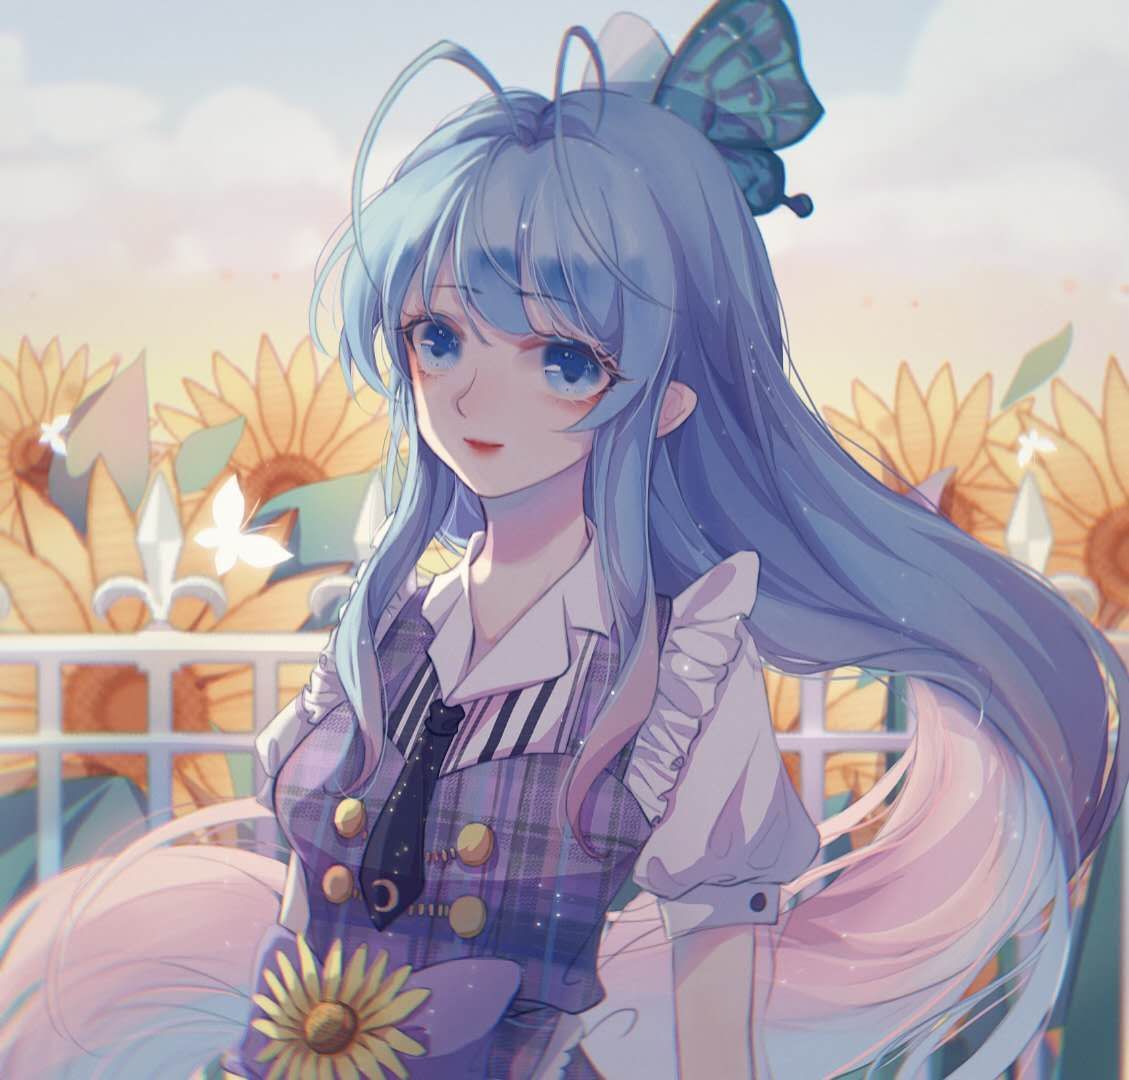 1girl big_eyes butterfly_hair_ornament clouds collared_dress douluo_dalu dress flower hair_ornament jiu_zui_lan_qin_rao_yin_shuang long_hair multicolored_hair necktie ribbon short_sleeves sky smile solo sparkle sunflower tang_wutong_(douluo_dalu) upper_body